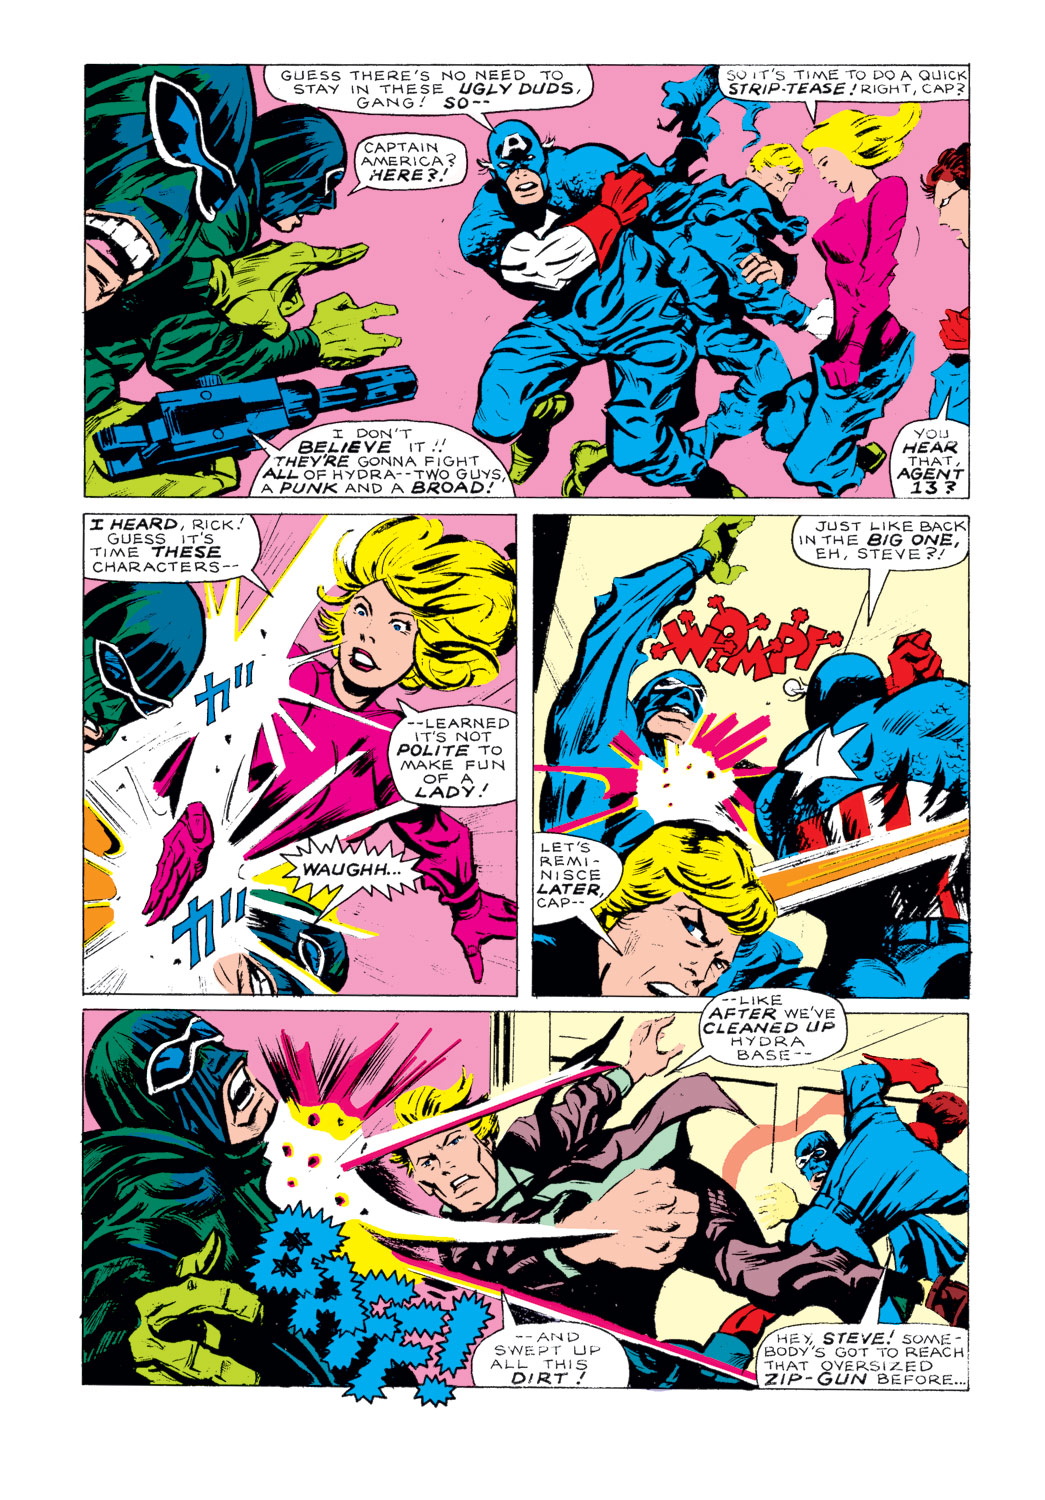 What If? (1977) issue 5 - Captain America hadn't vanished during World War Two - Page 23